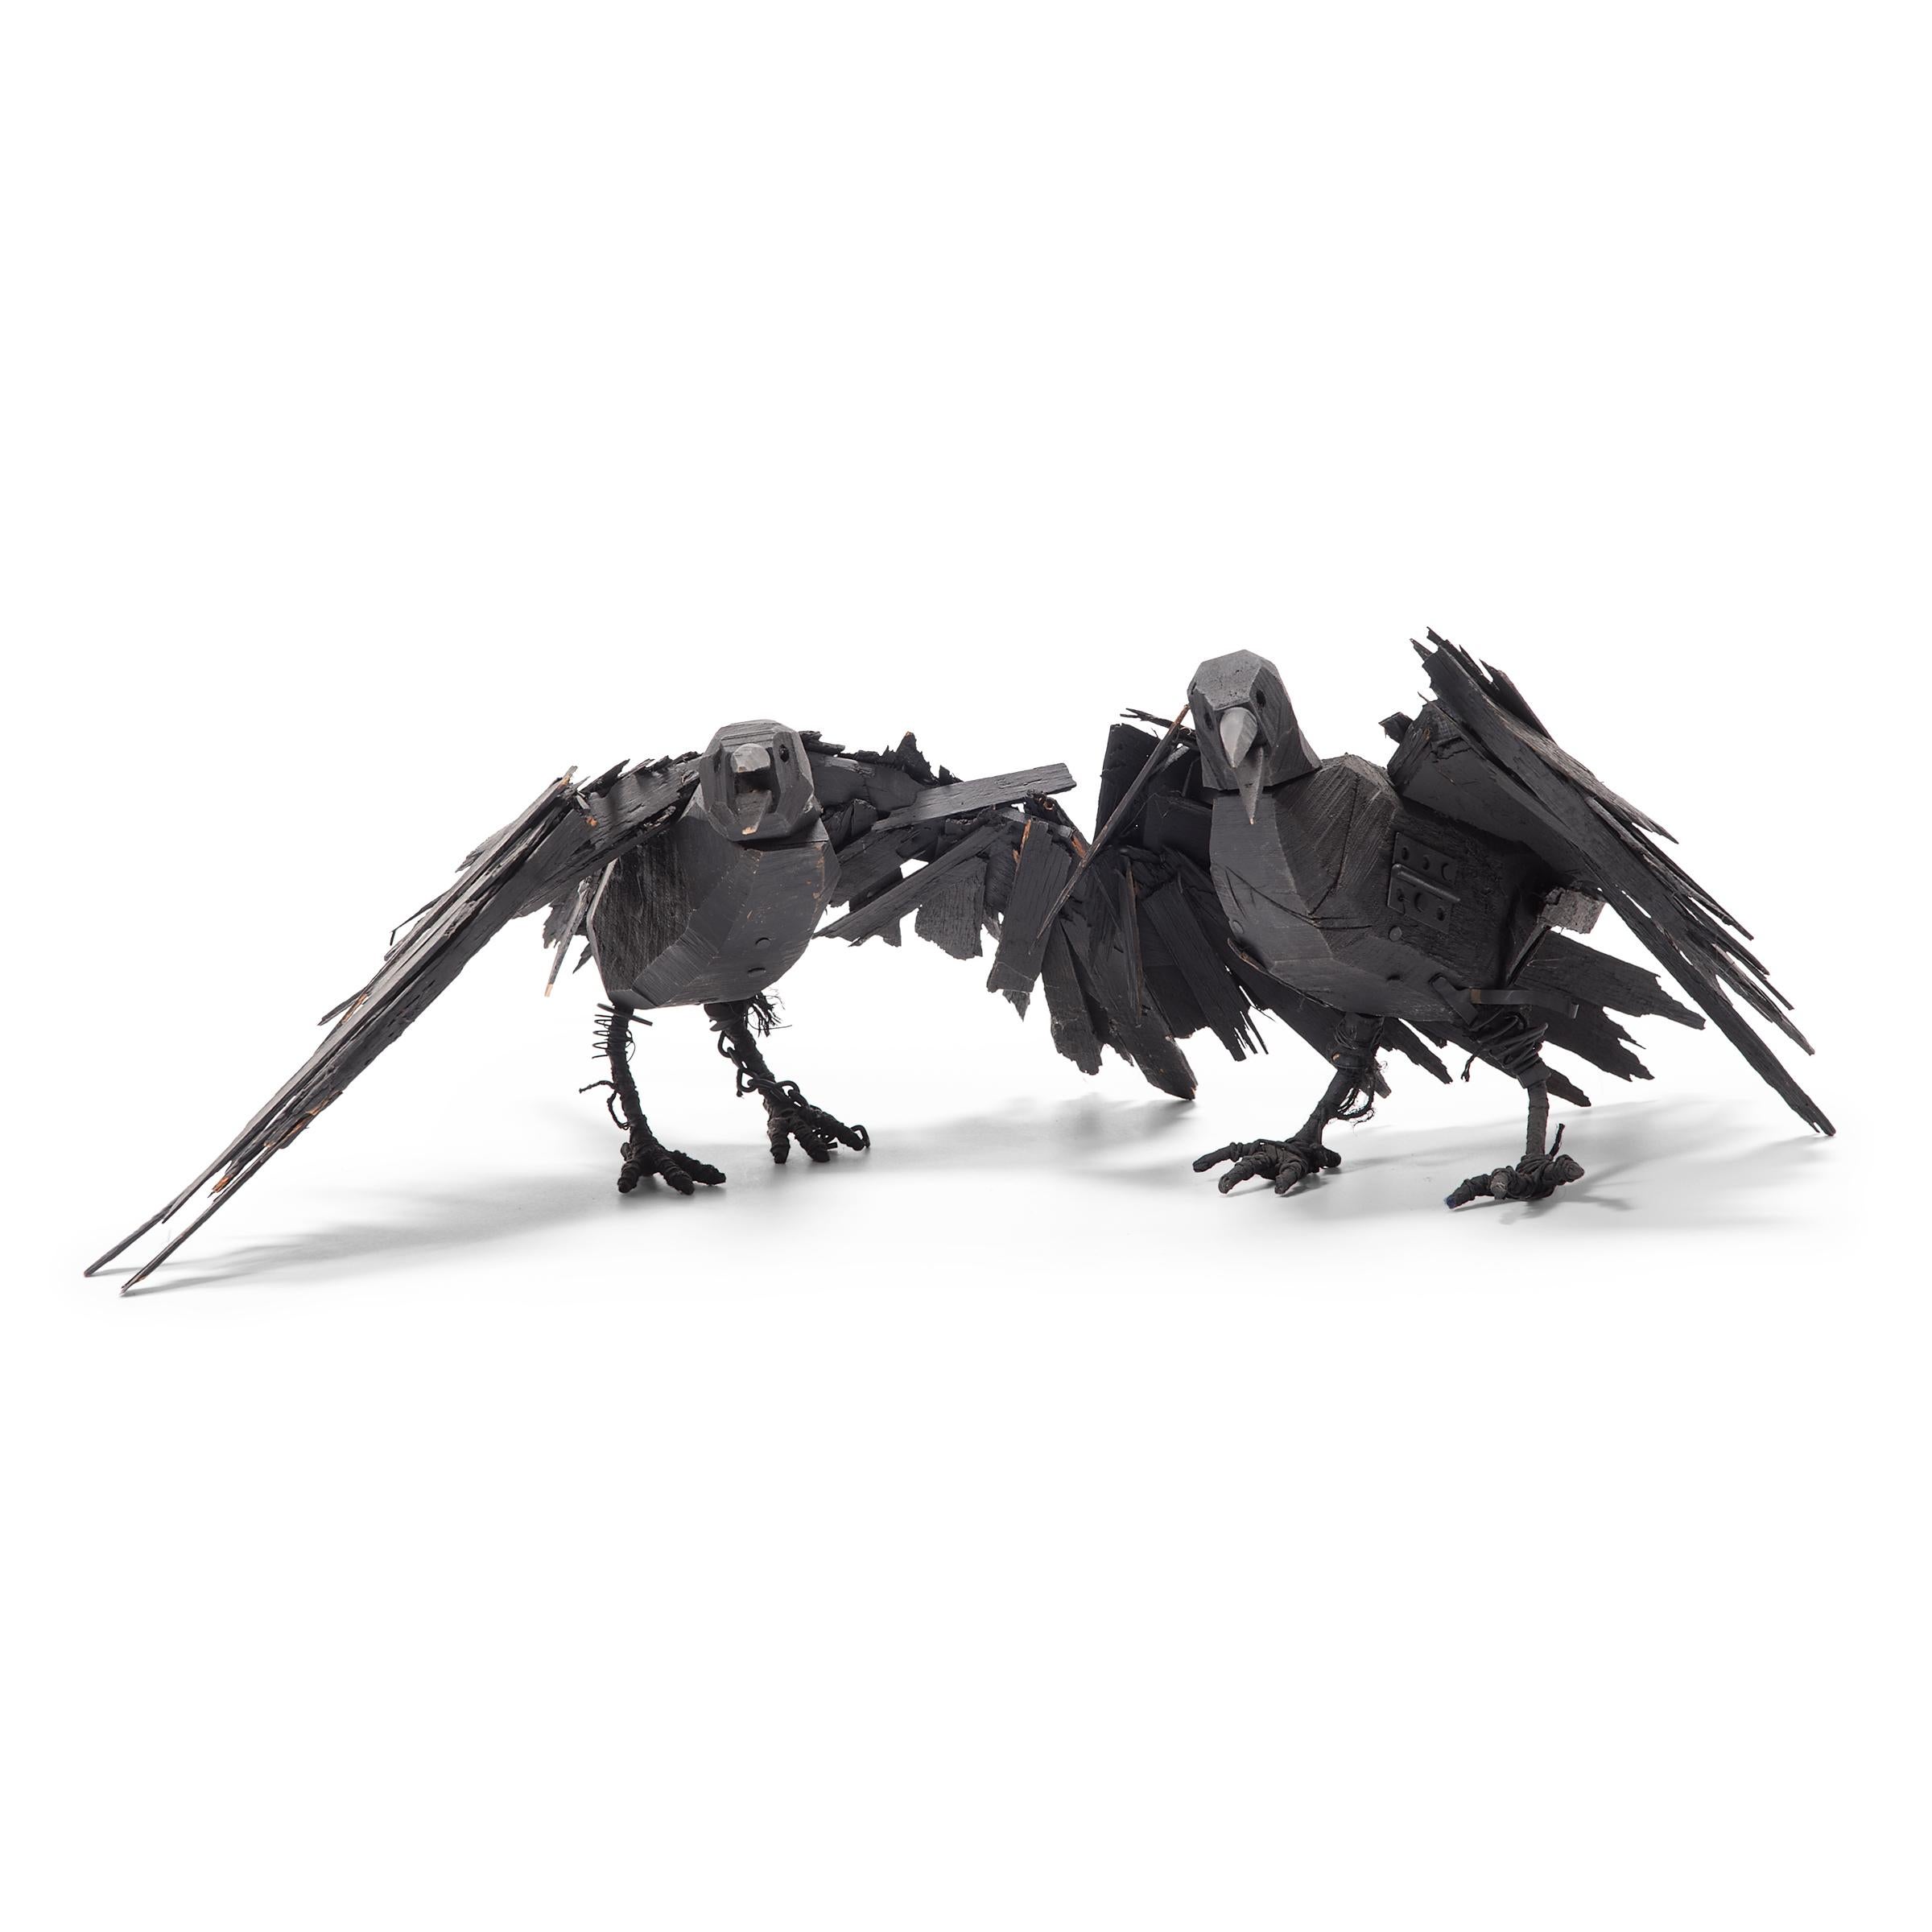 Richly textured with whimsical appeal, this late 20th century wooden crow is a delightful example of naive American sculpture. Poised mid-caw, the crow's wings are outstretched, ready to burst into flight. As though life materialized from a pile of